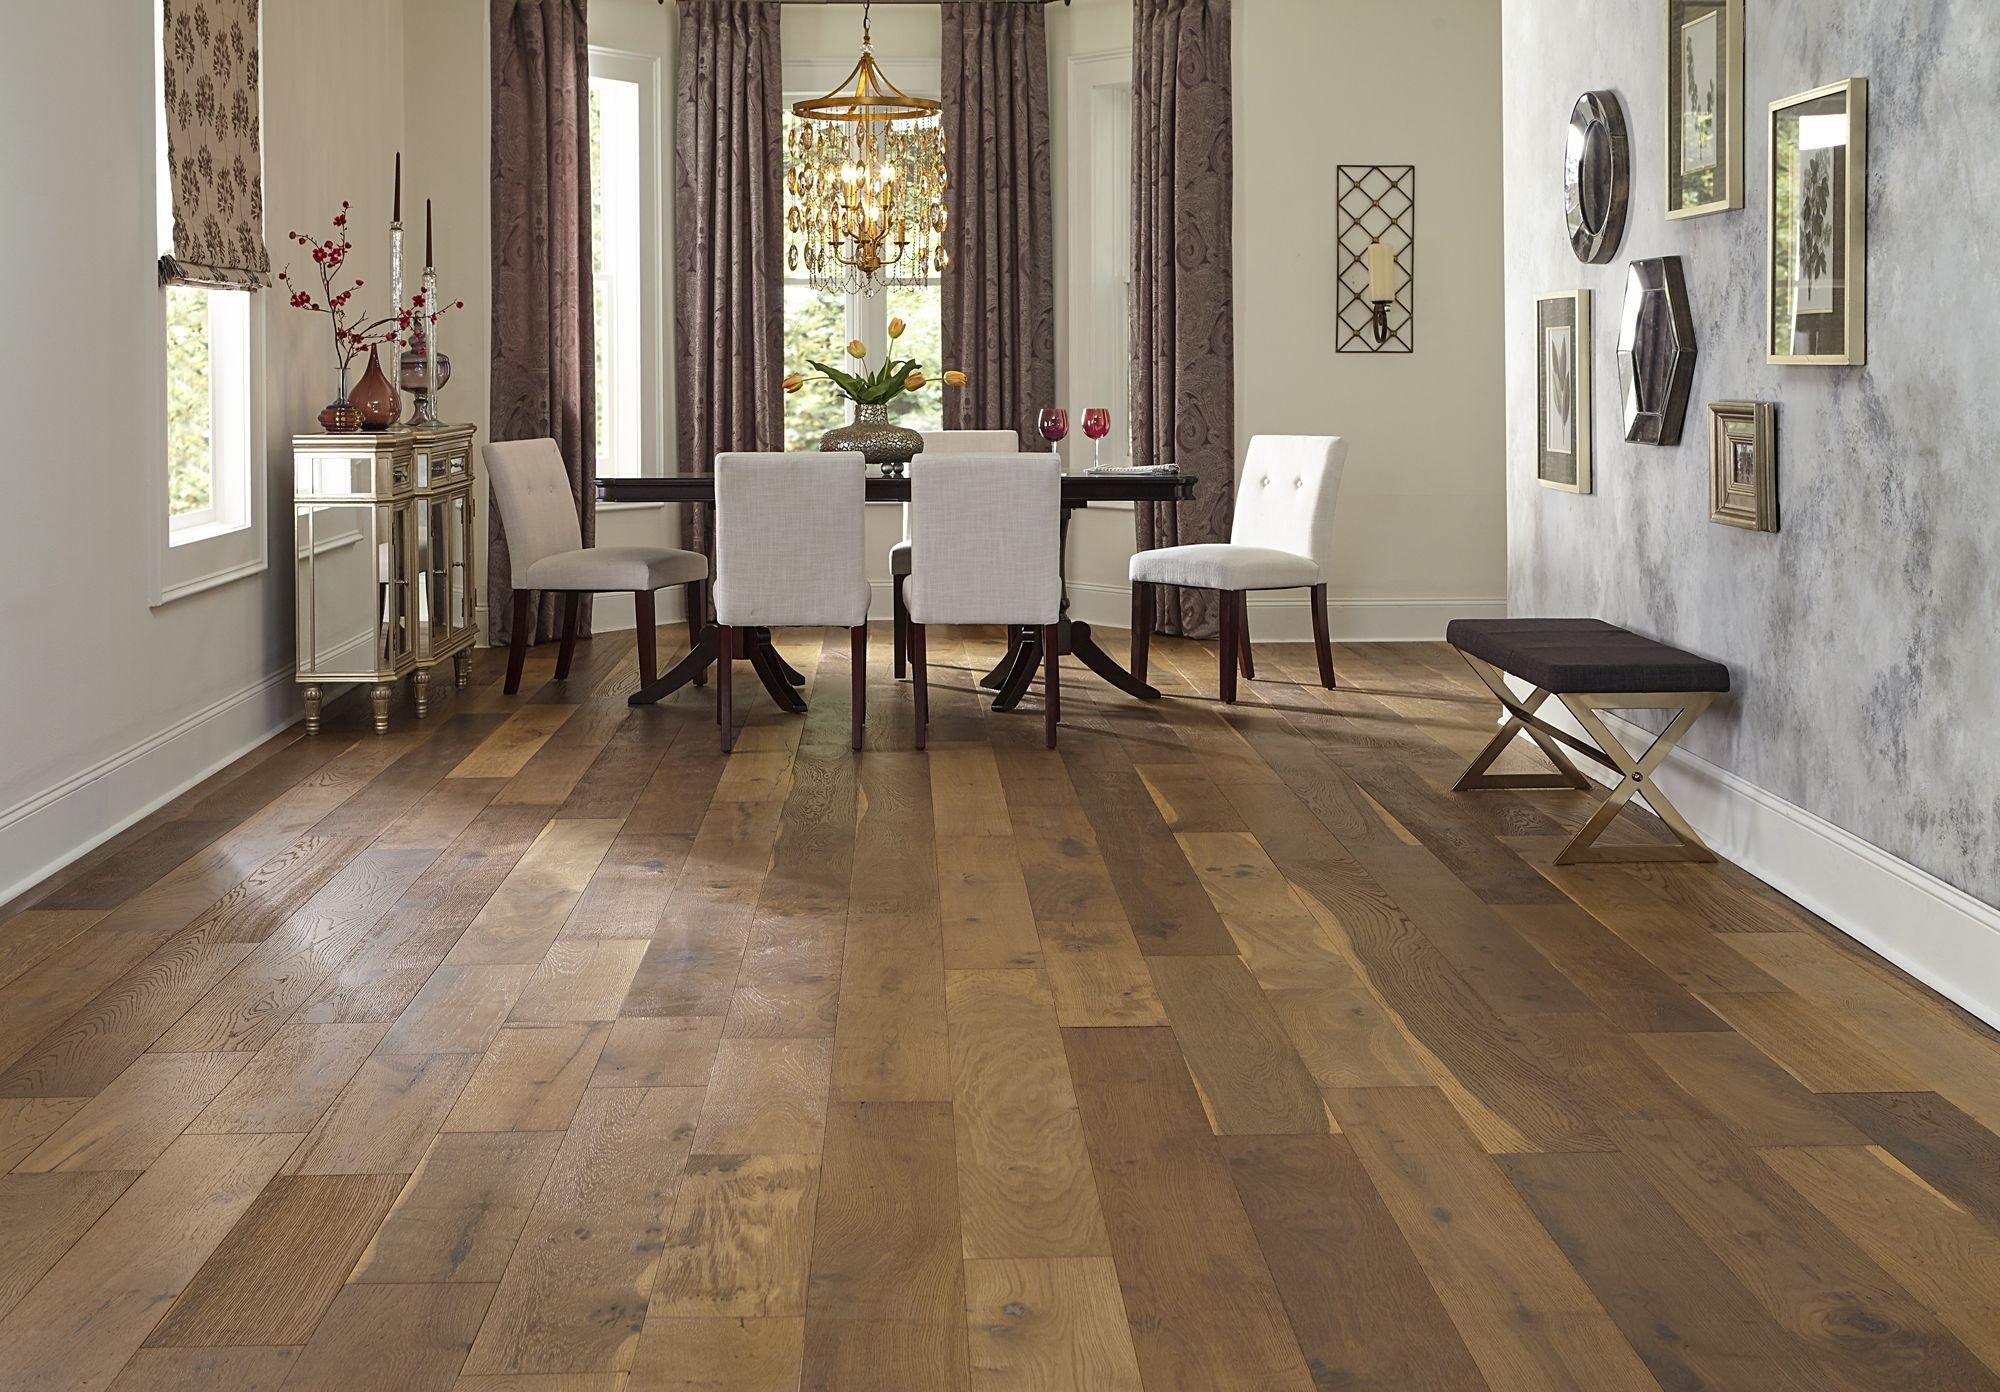 11 Stylish Hardwood Flooring Maine 2024 free download hardwood flooring maine of 7 1 2 wide planks and a rustic look bellawood willow manor oak has with regard to 7 1 2 wide planks and a rustic look bellawood willow manor oak has a storied old 